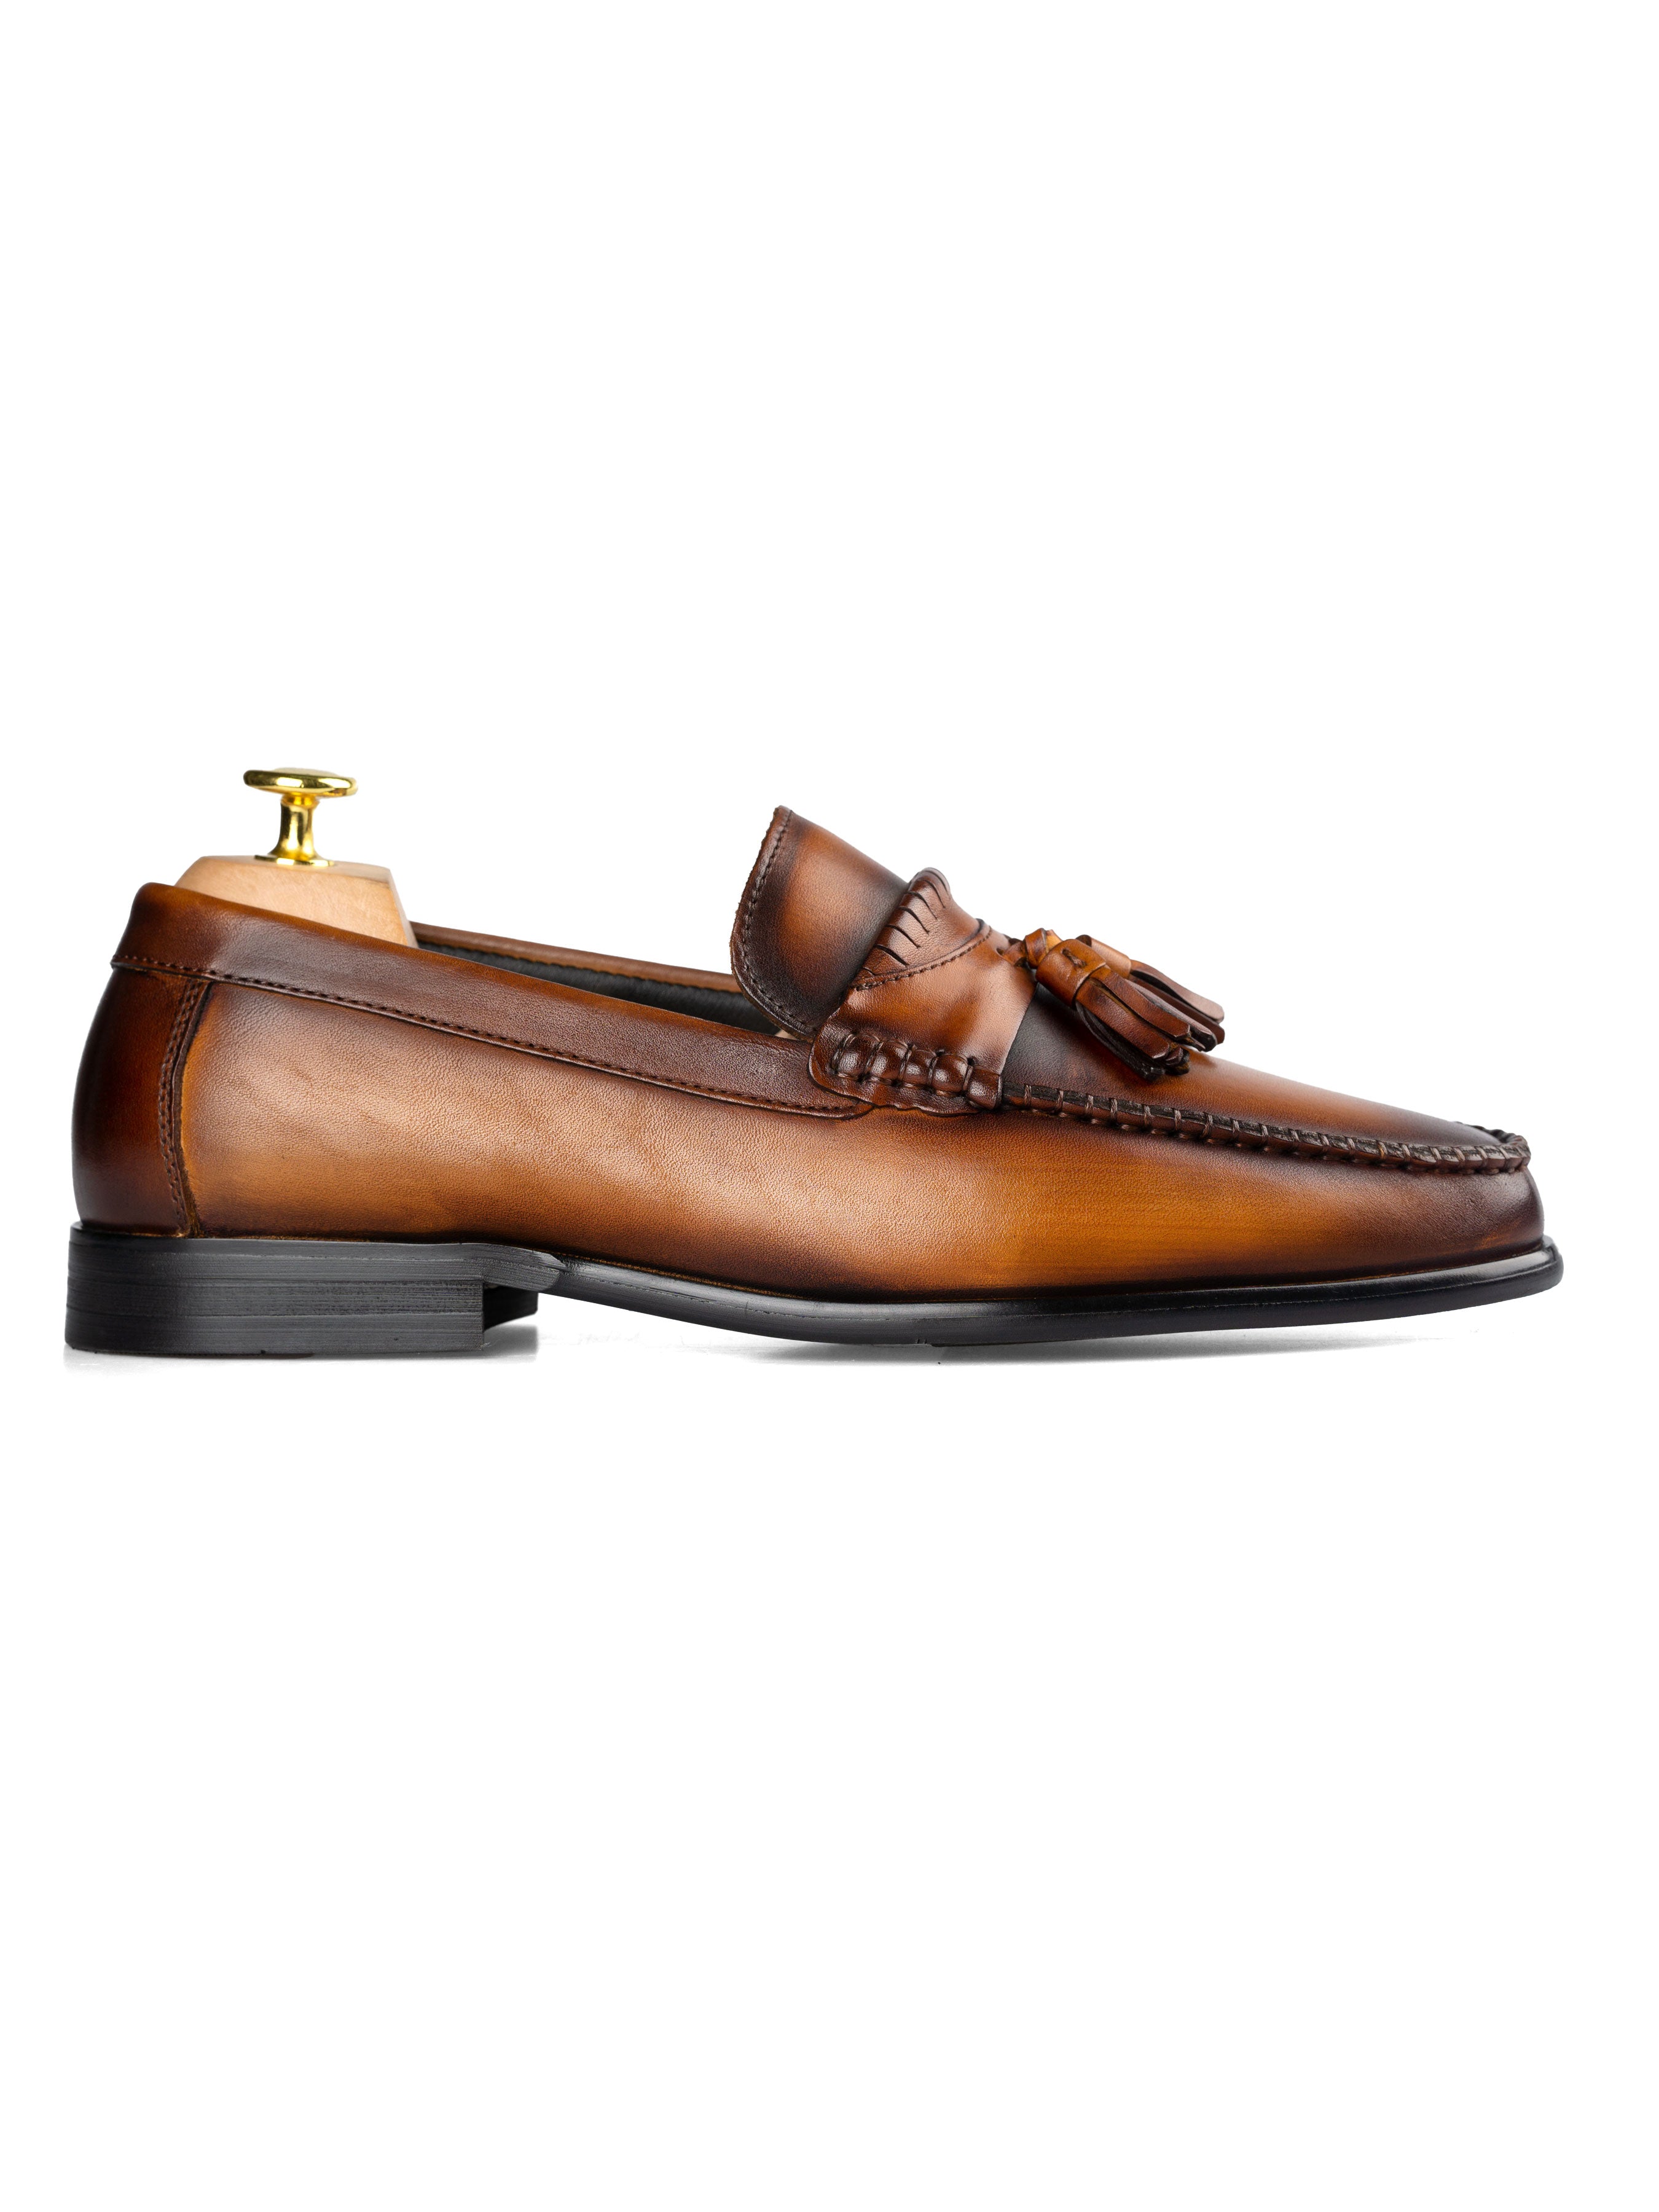 Tassel Moccasin Loafer - Cognac Tan (Hand Painted Patina) - Zeve Shoes